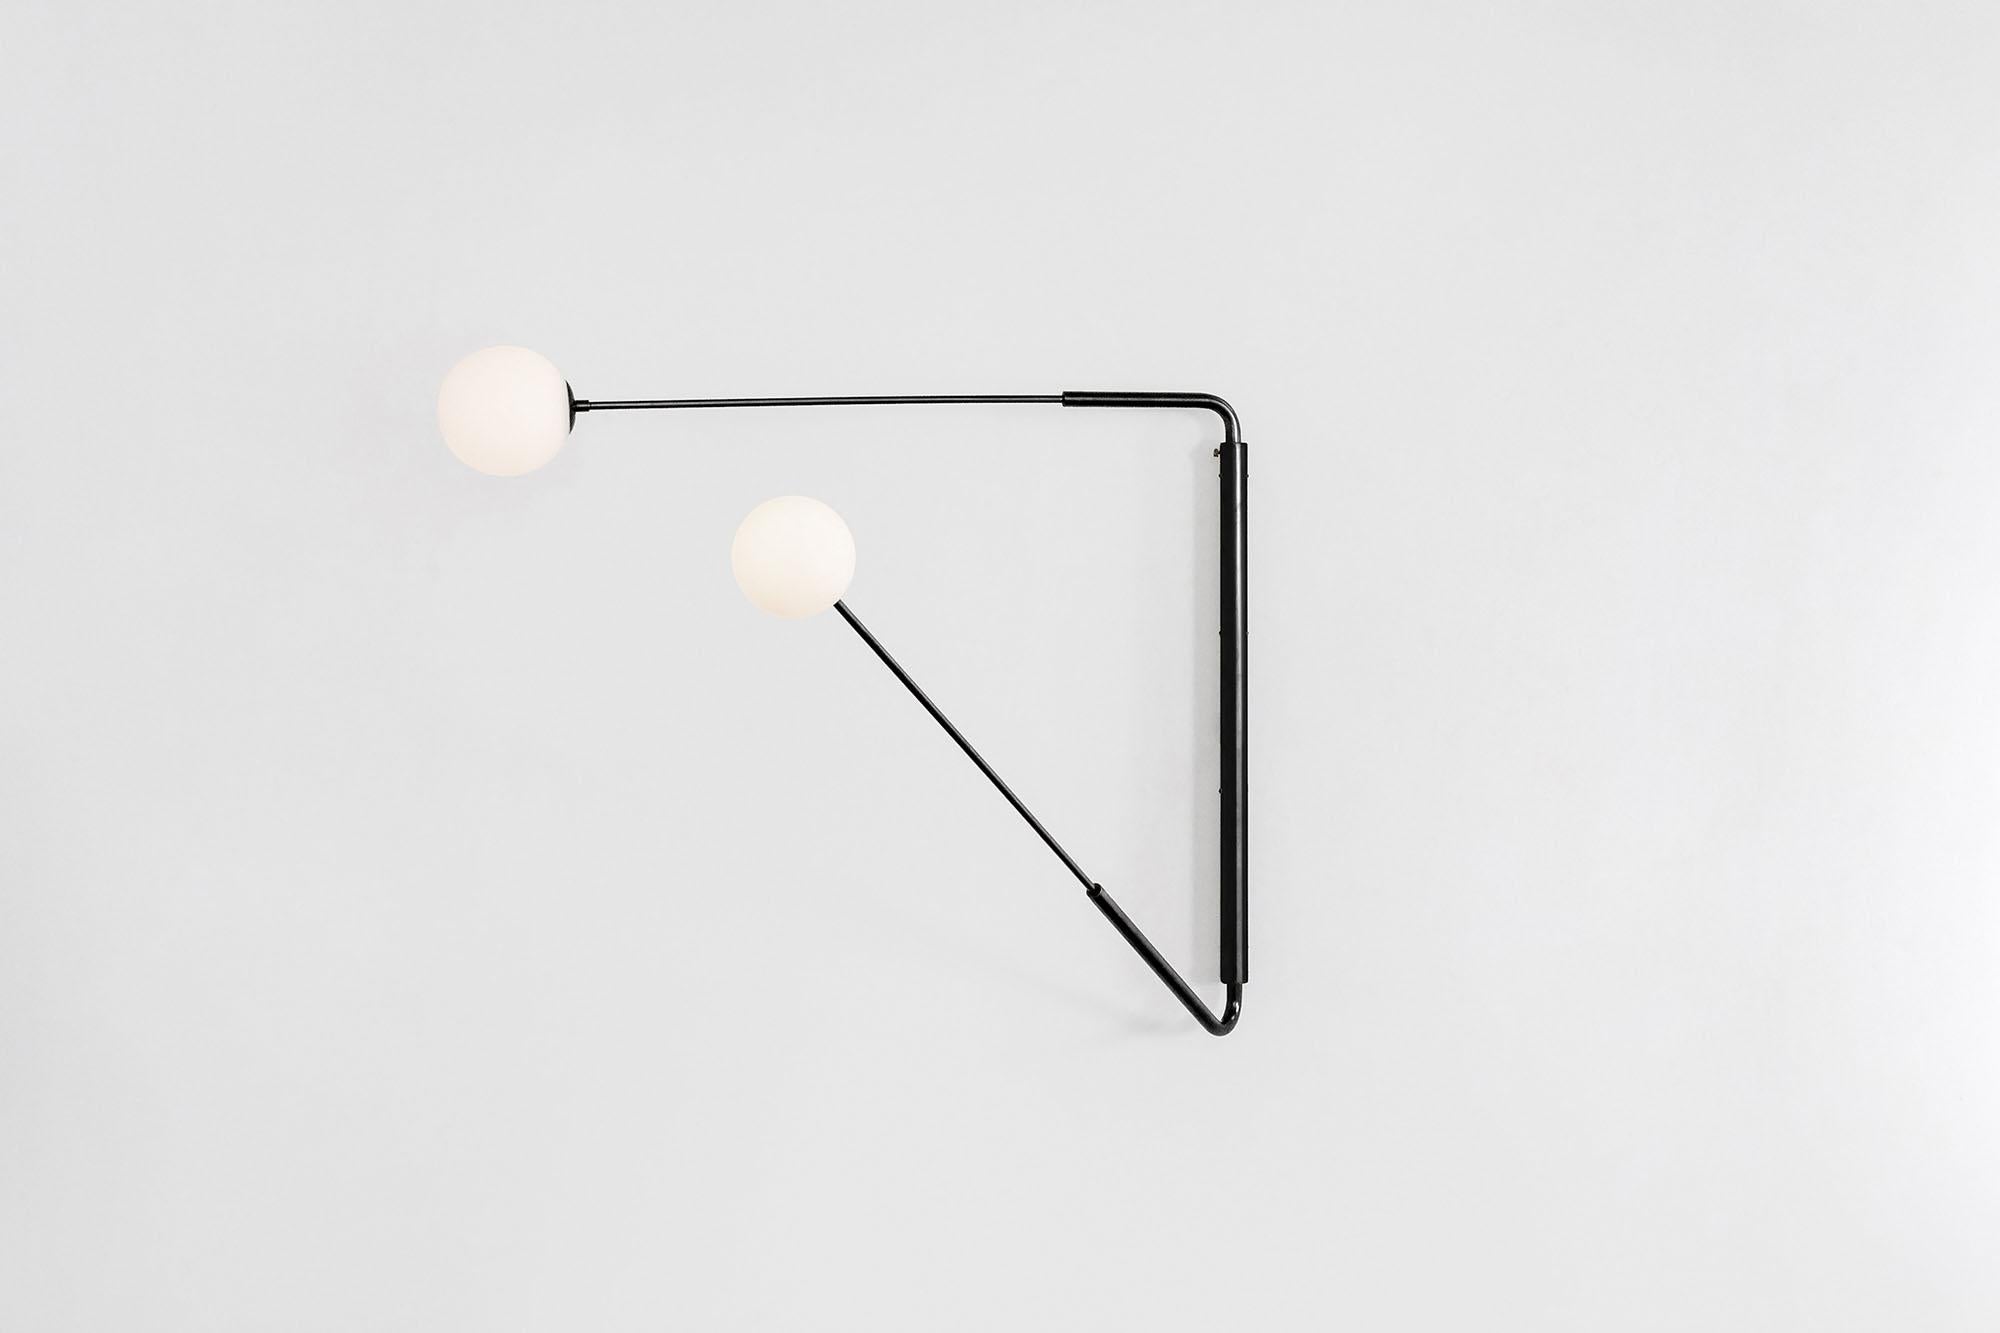 Contemporary Burnt Brass Swing Arm Wall Sconce, Flutter One by Paul Matter

The long rotating arms are attached to a vertical, wall-mounted spine that results in a Minimalist yet oversized fixture. Flutter comes in three variations, each with two